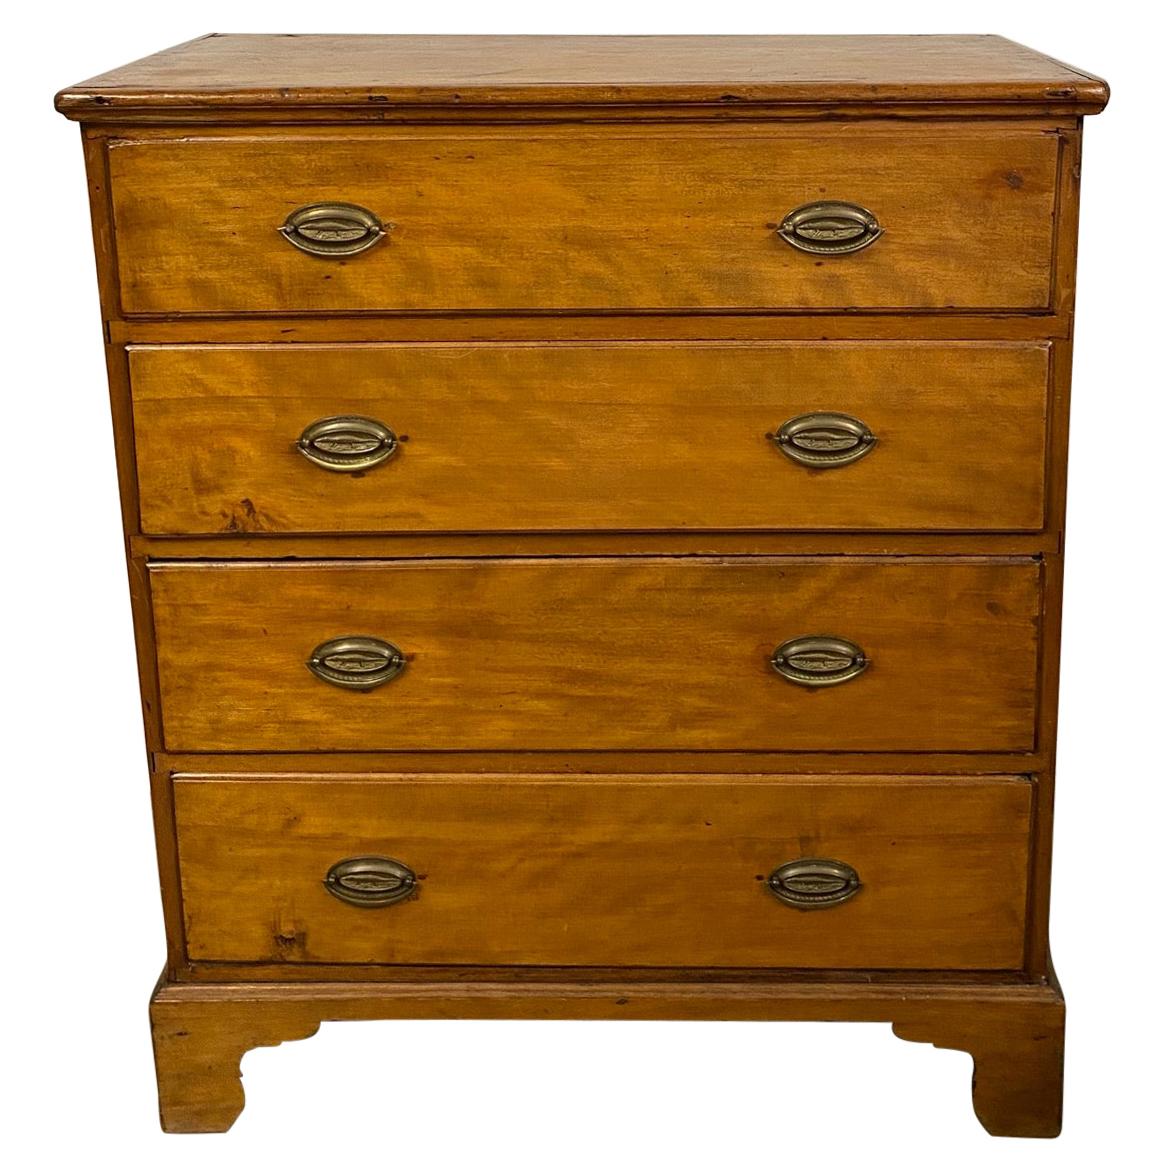 Antique English Lift Top Chest of Drawers